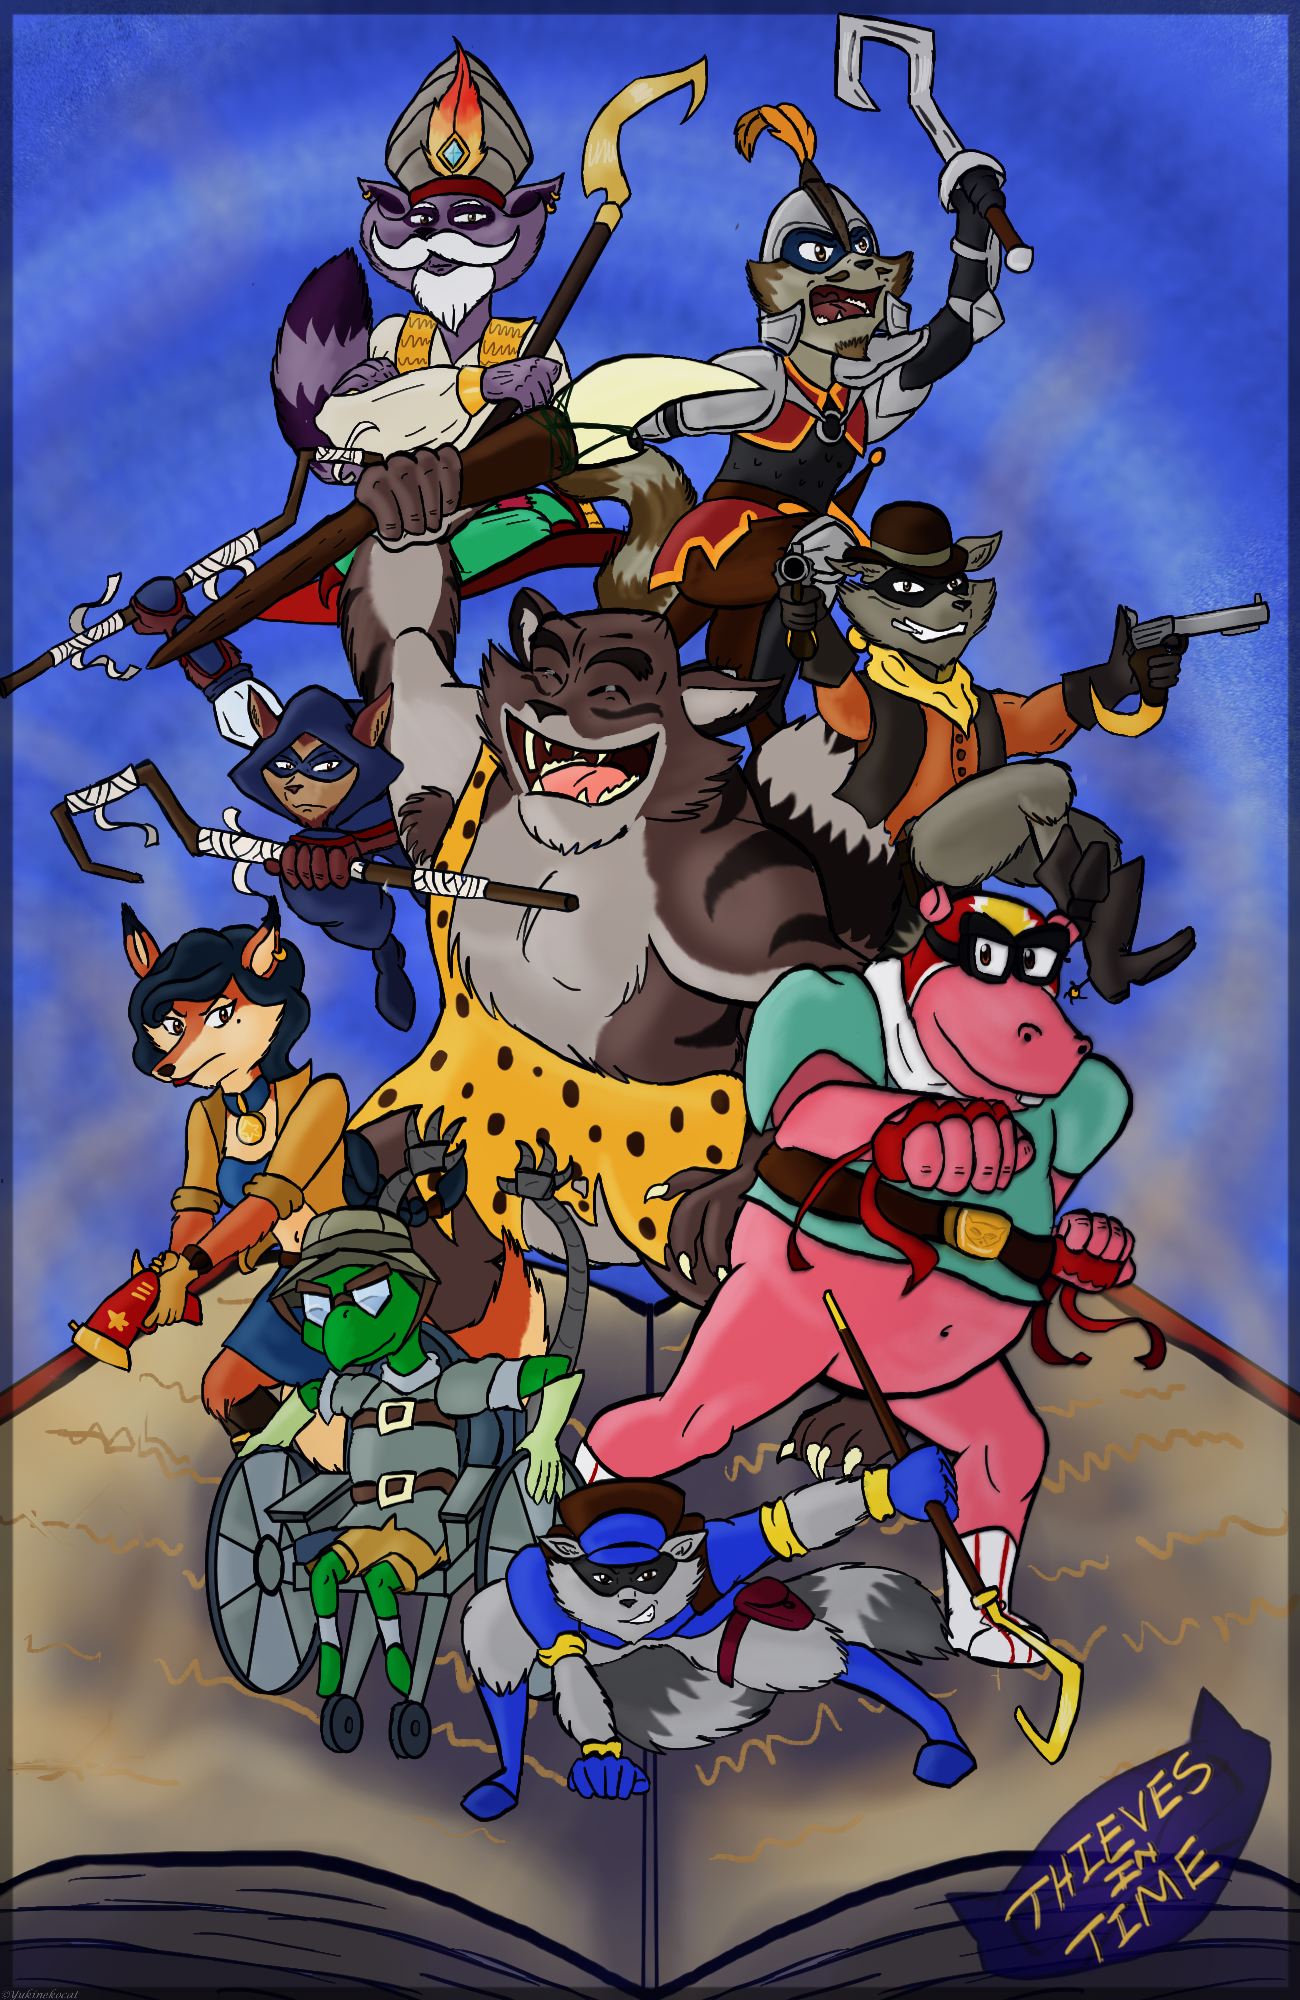 sly cooper - thieves in time | Poster